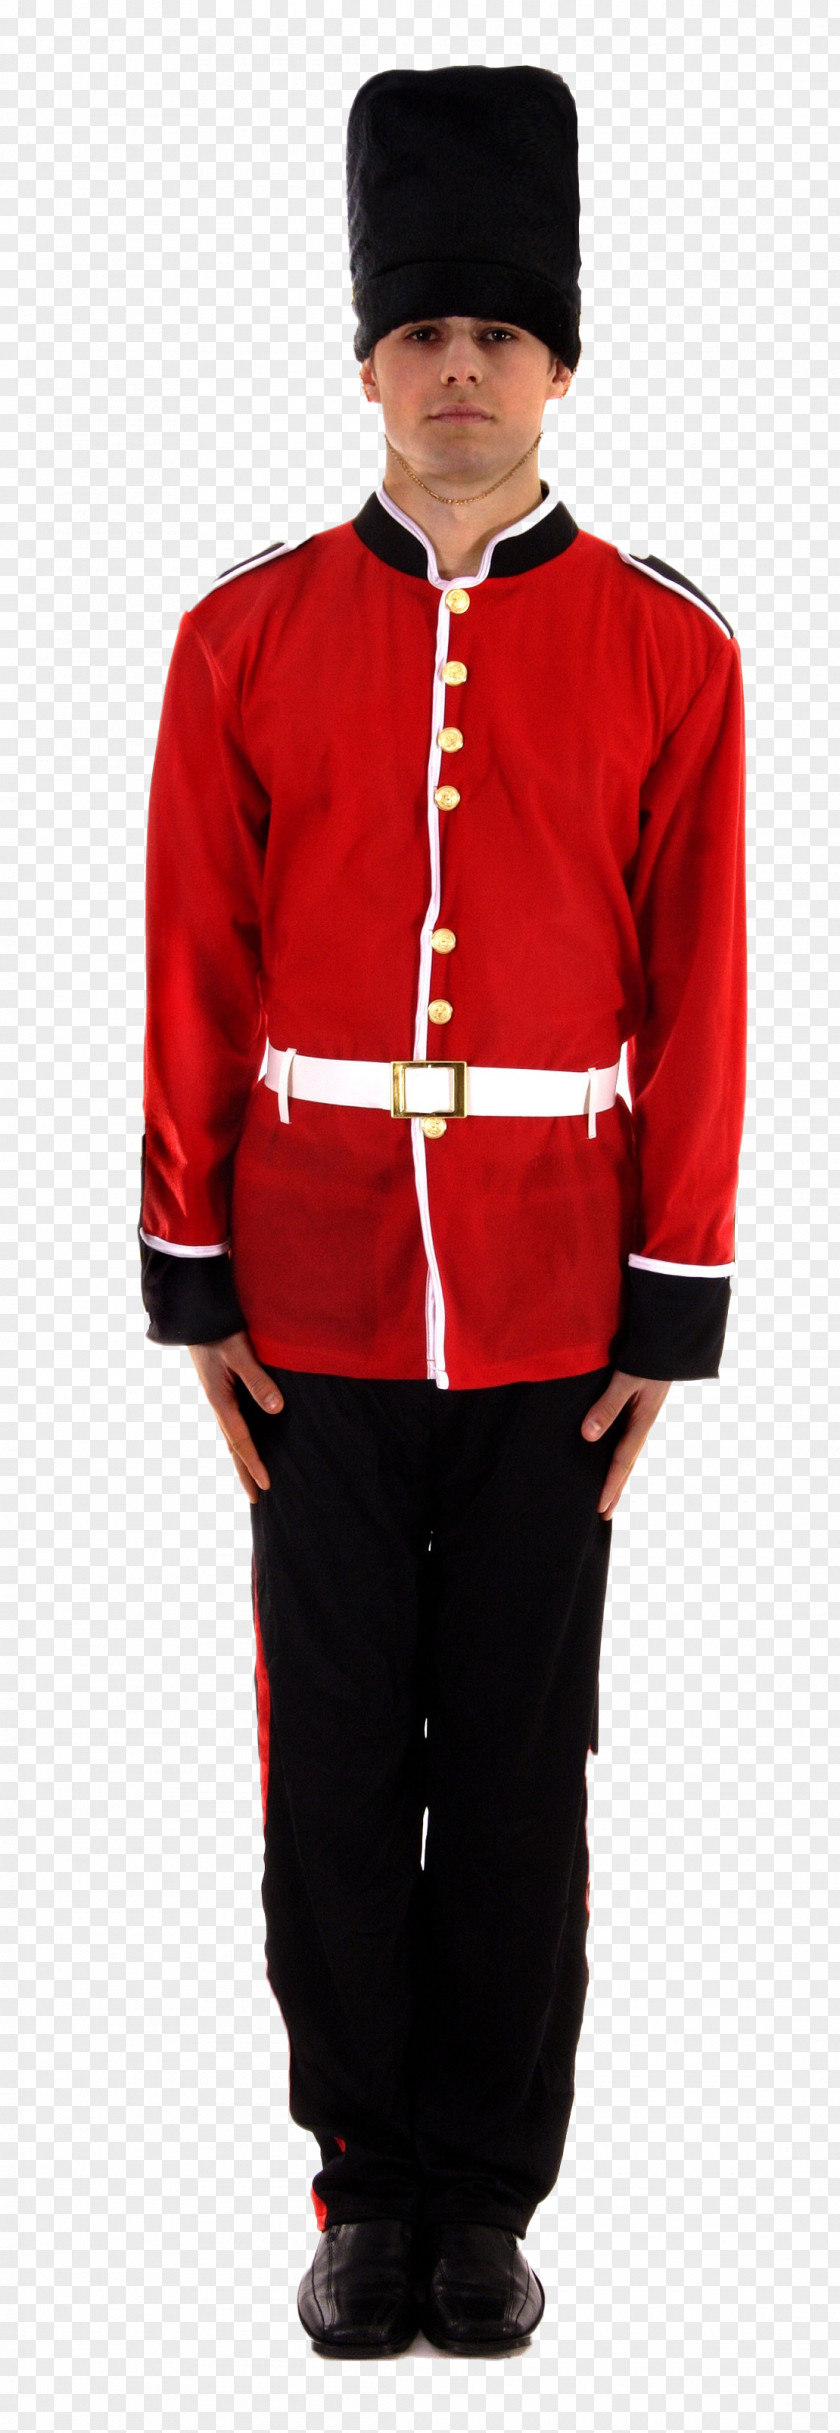 United Kingdom Costume Party Queen's Guard Royal PNG